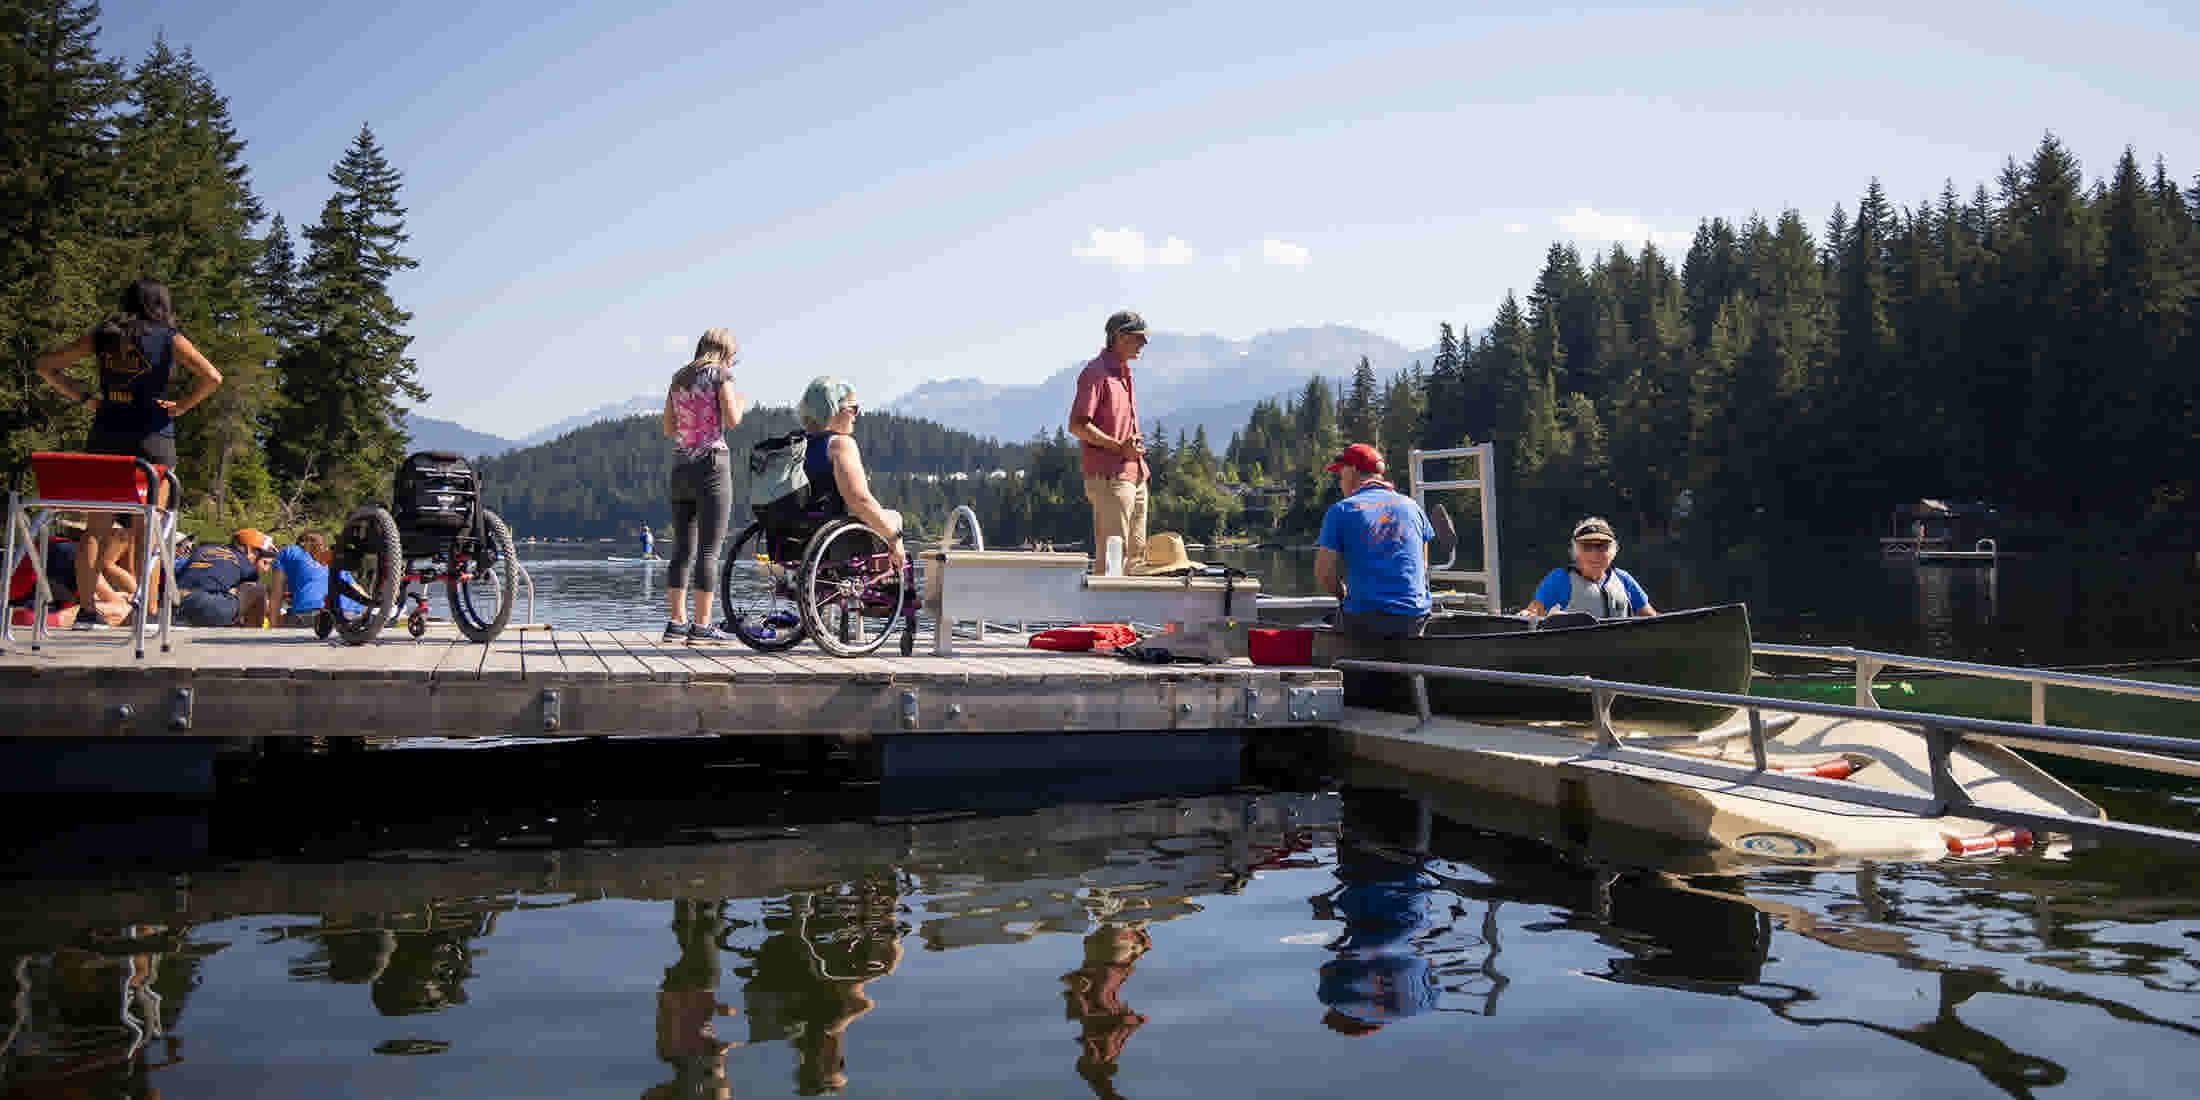 Whistler Adaptive assisting people in wheelchairs to get into watercraft on Alta Lake in Whistler